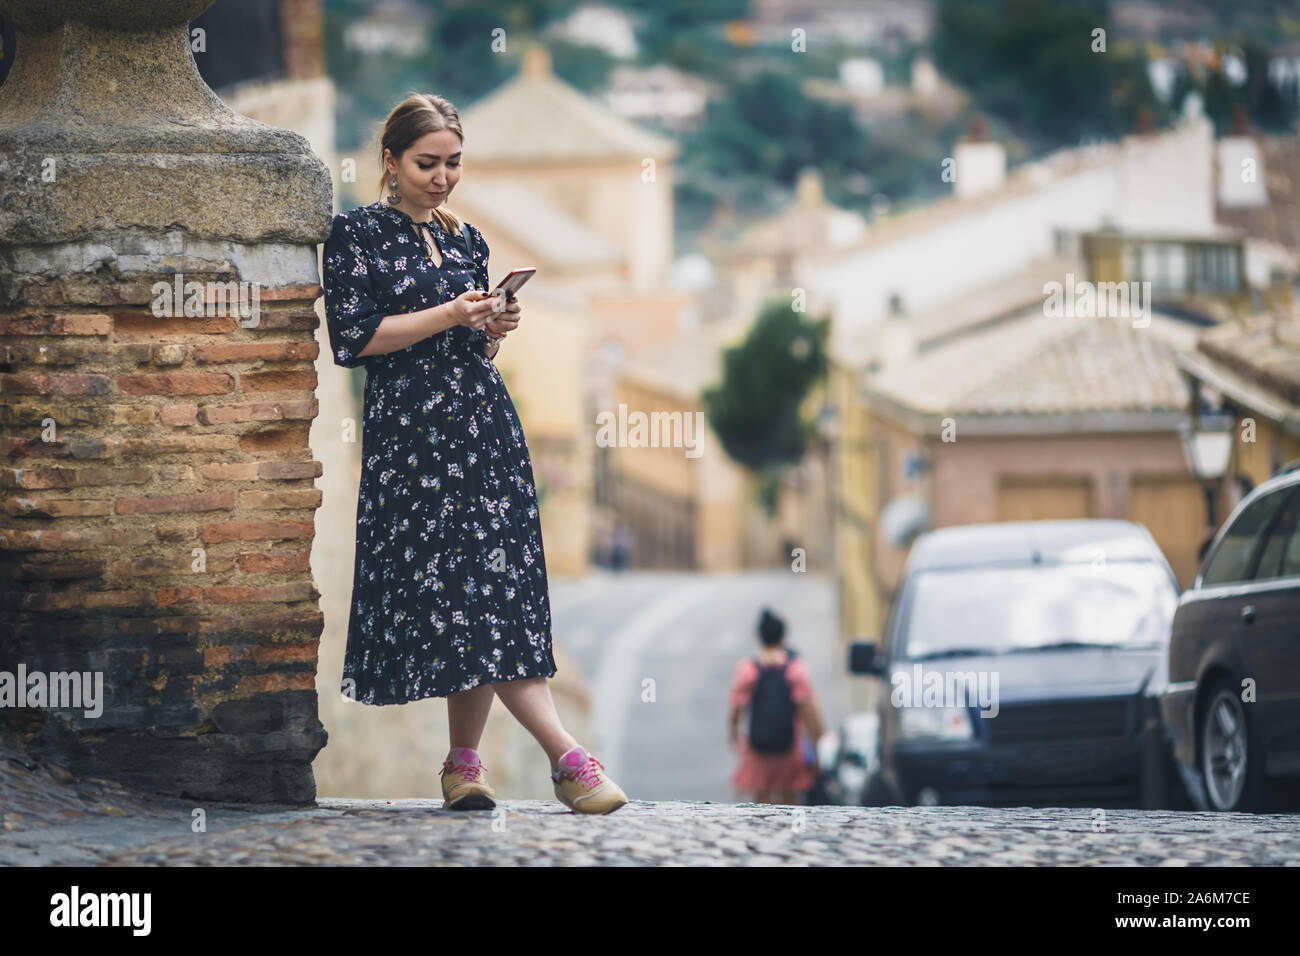 Pretty young woman in a black dress using smartphone at old town street. Travel by Europe. Stock Photo